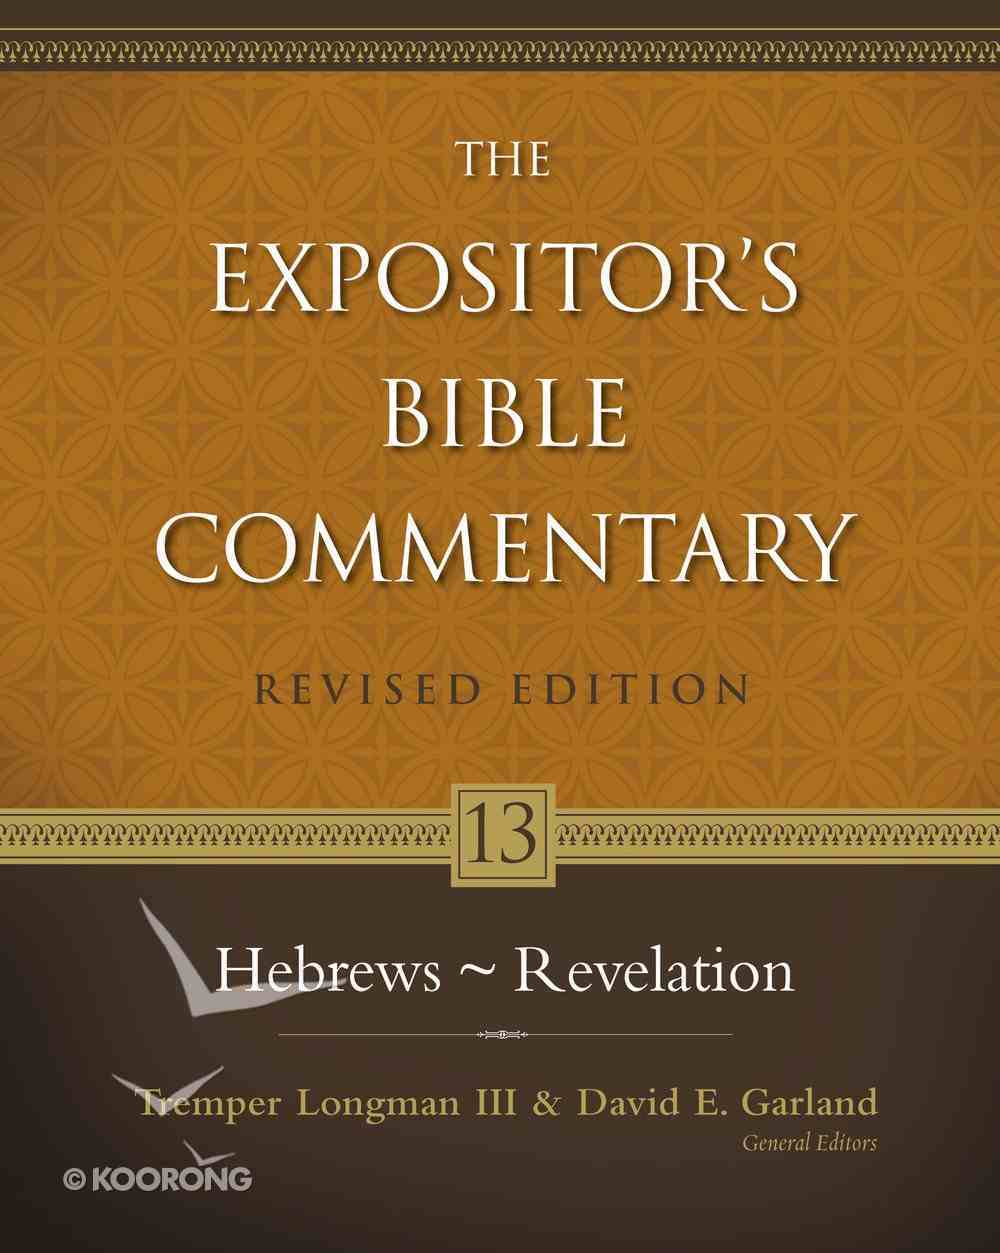 Hebrews-Revelation (#13 in Expositor's Bible Commentary Revised Series) eBook